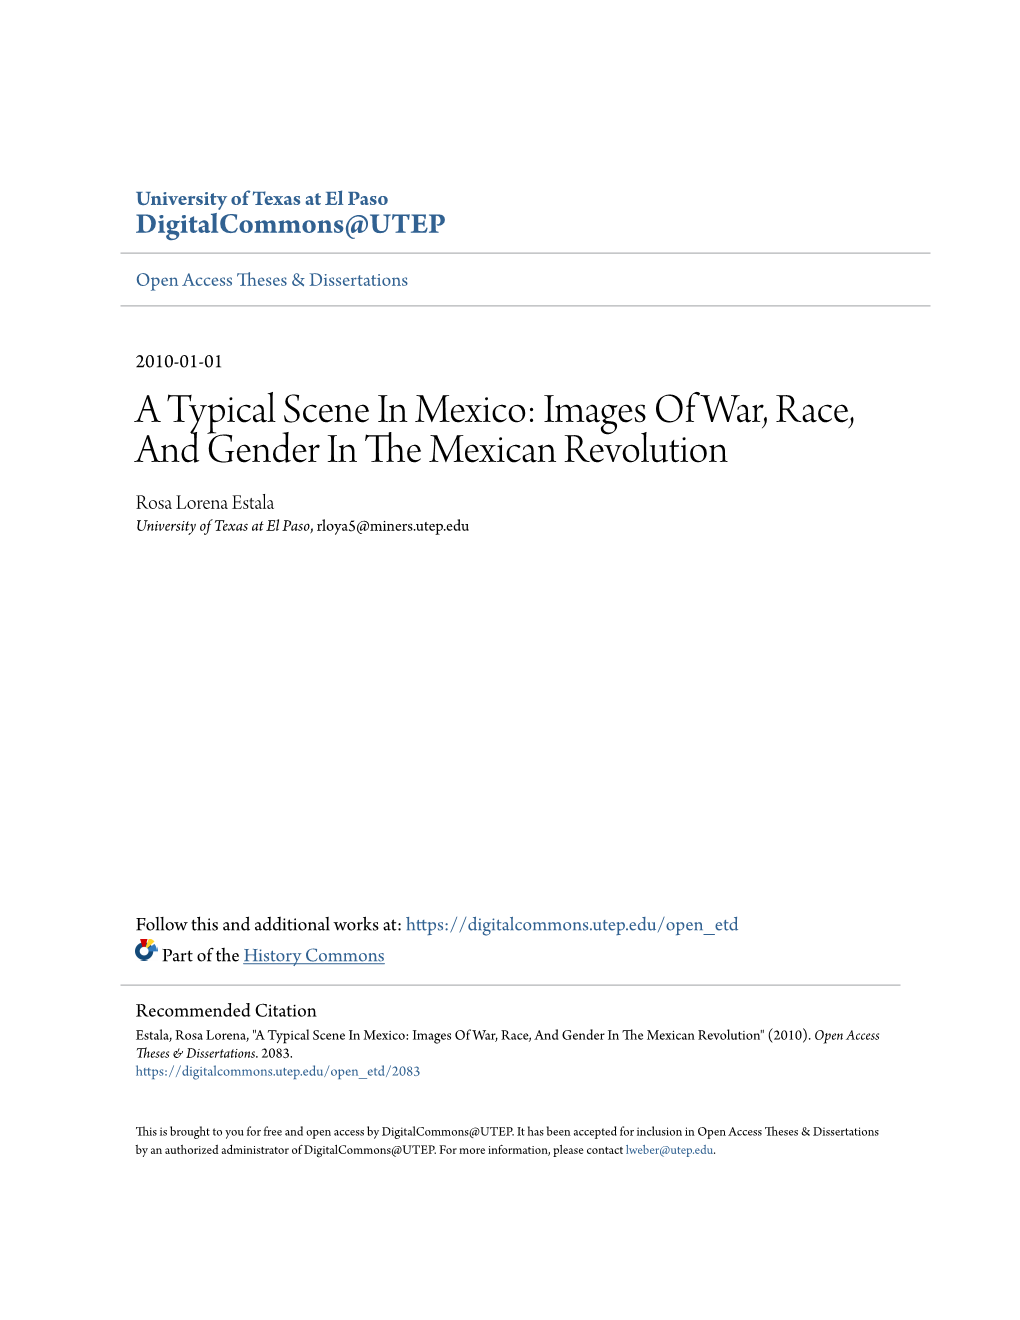 A Typical Scene in Mexico: Images of War, Race, and Gender in the Exm Ican Revolution Rosa Lorena Estala University of Texas at El Paso, Rloya5@Miners.Utep.Edu